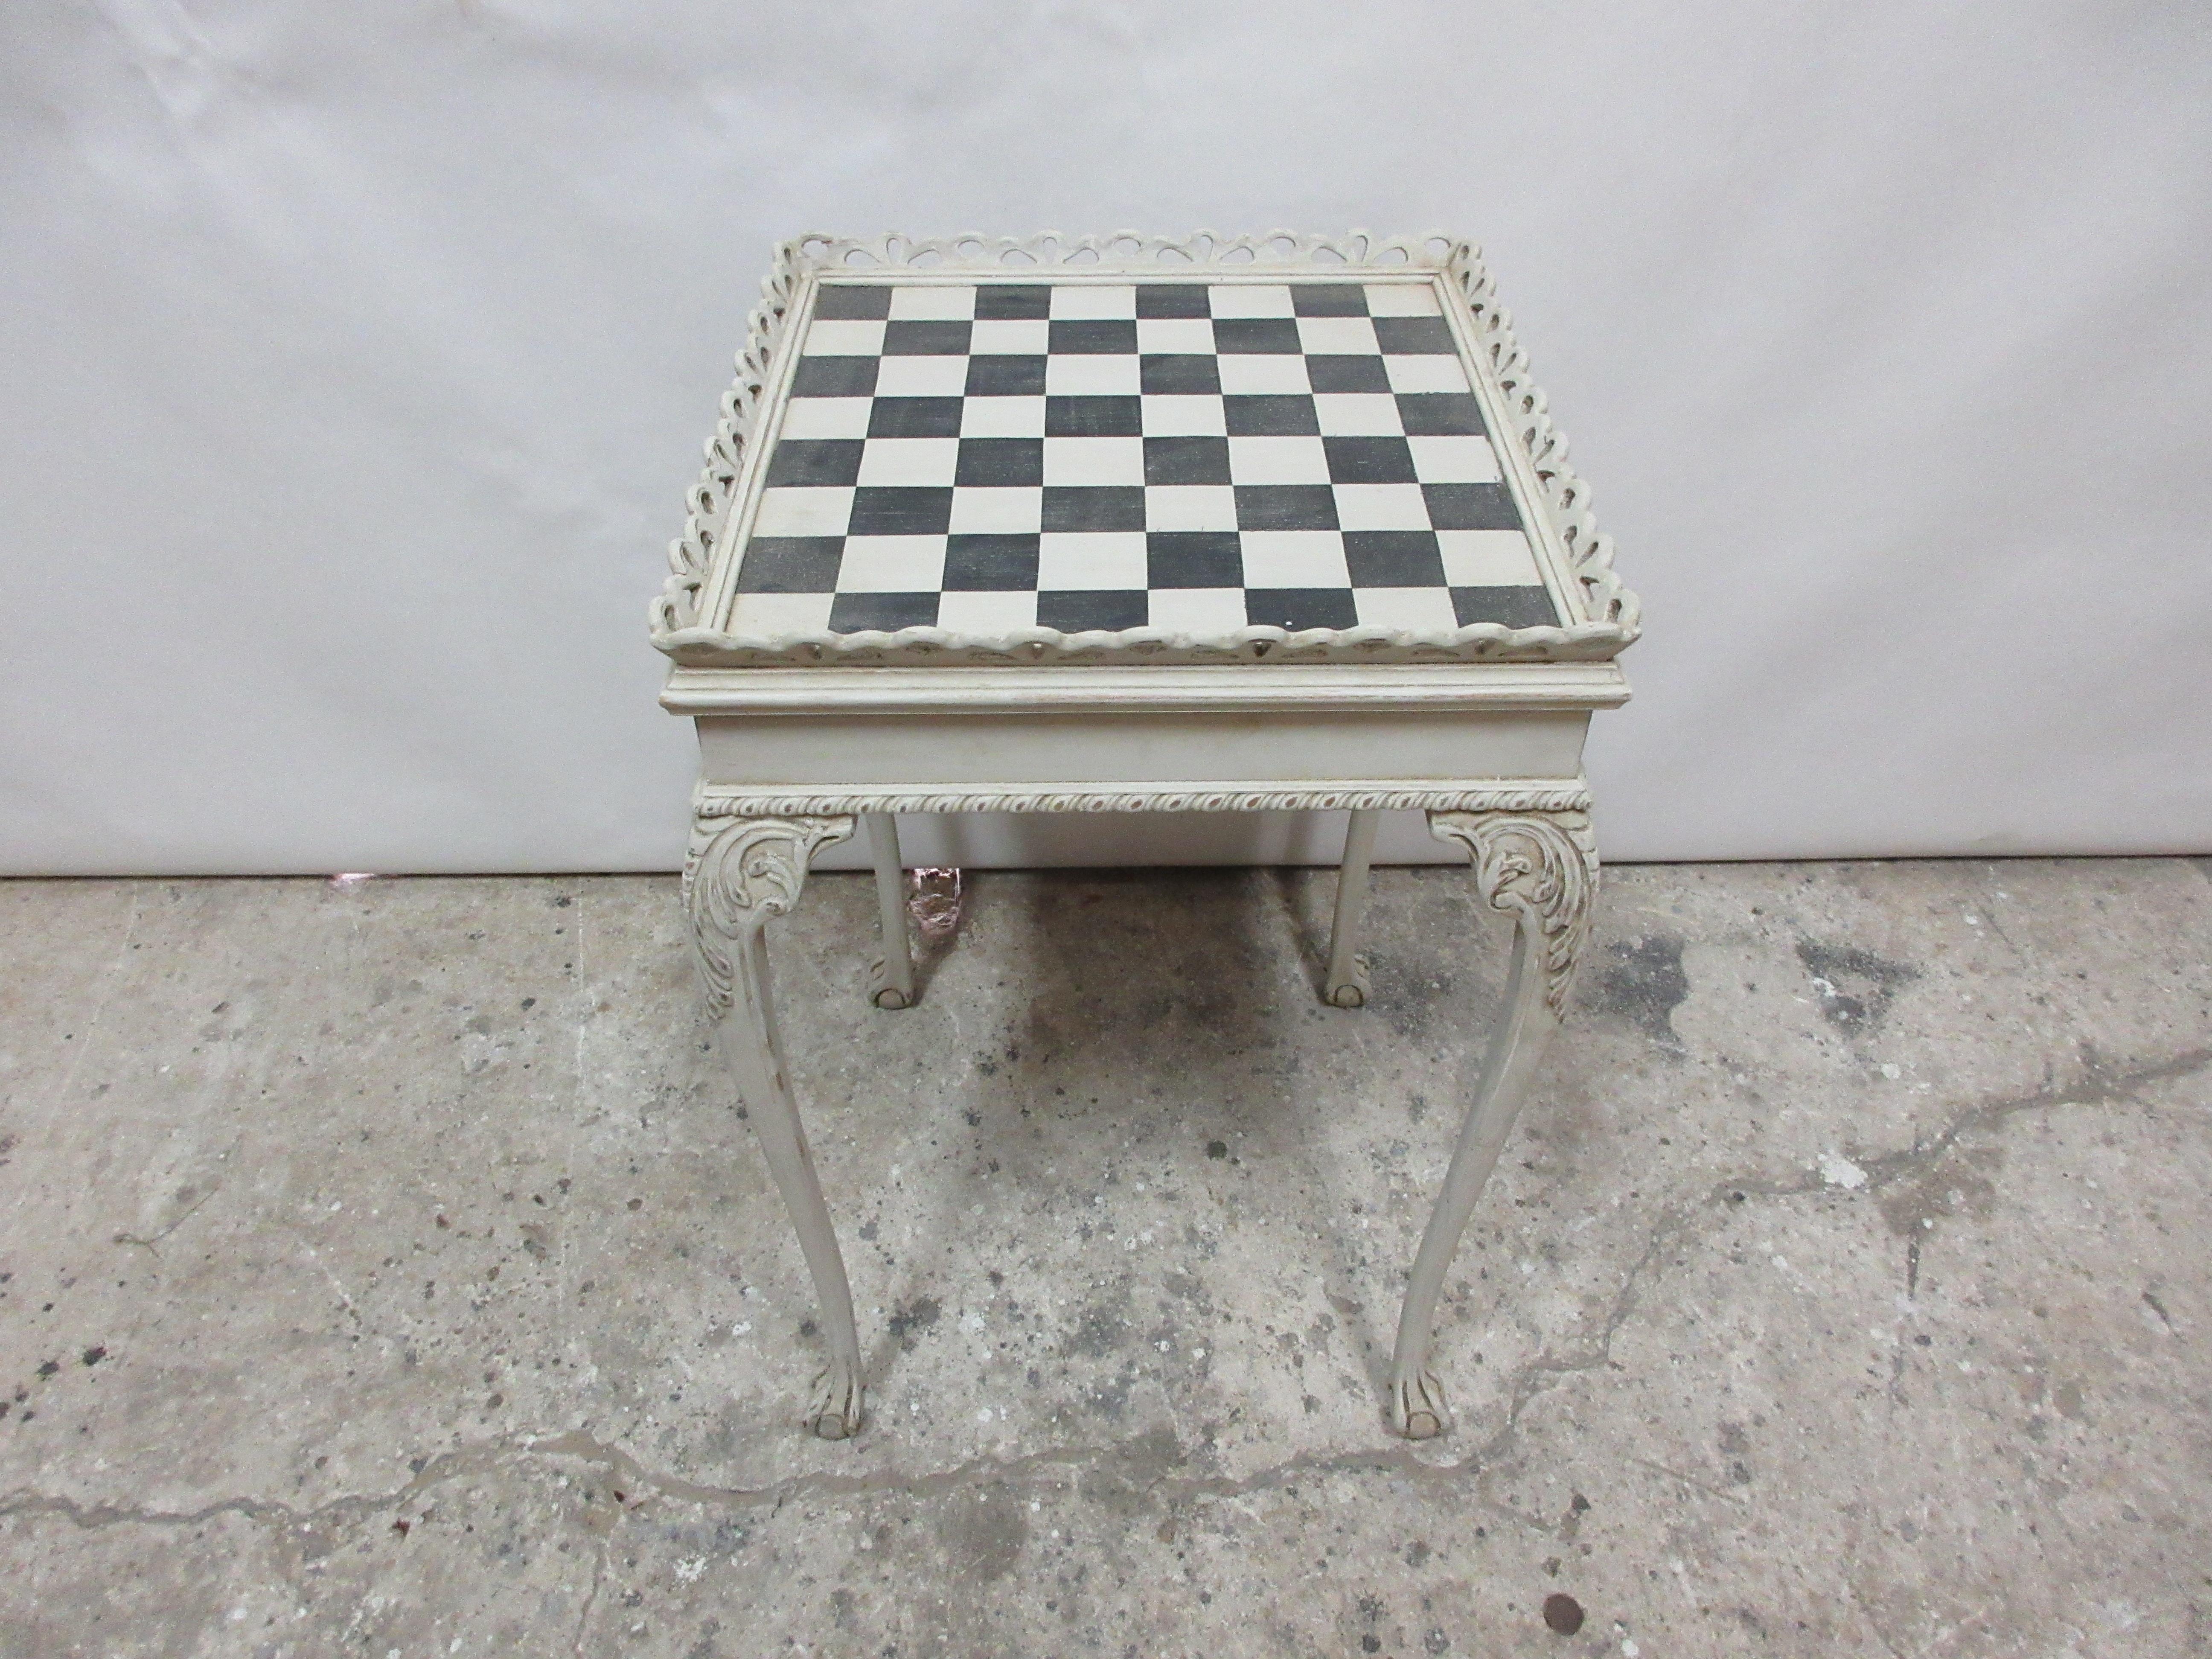 This is a Rococo style chess table.